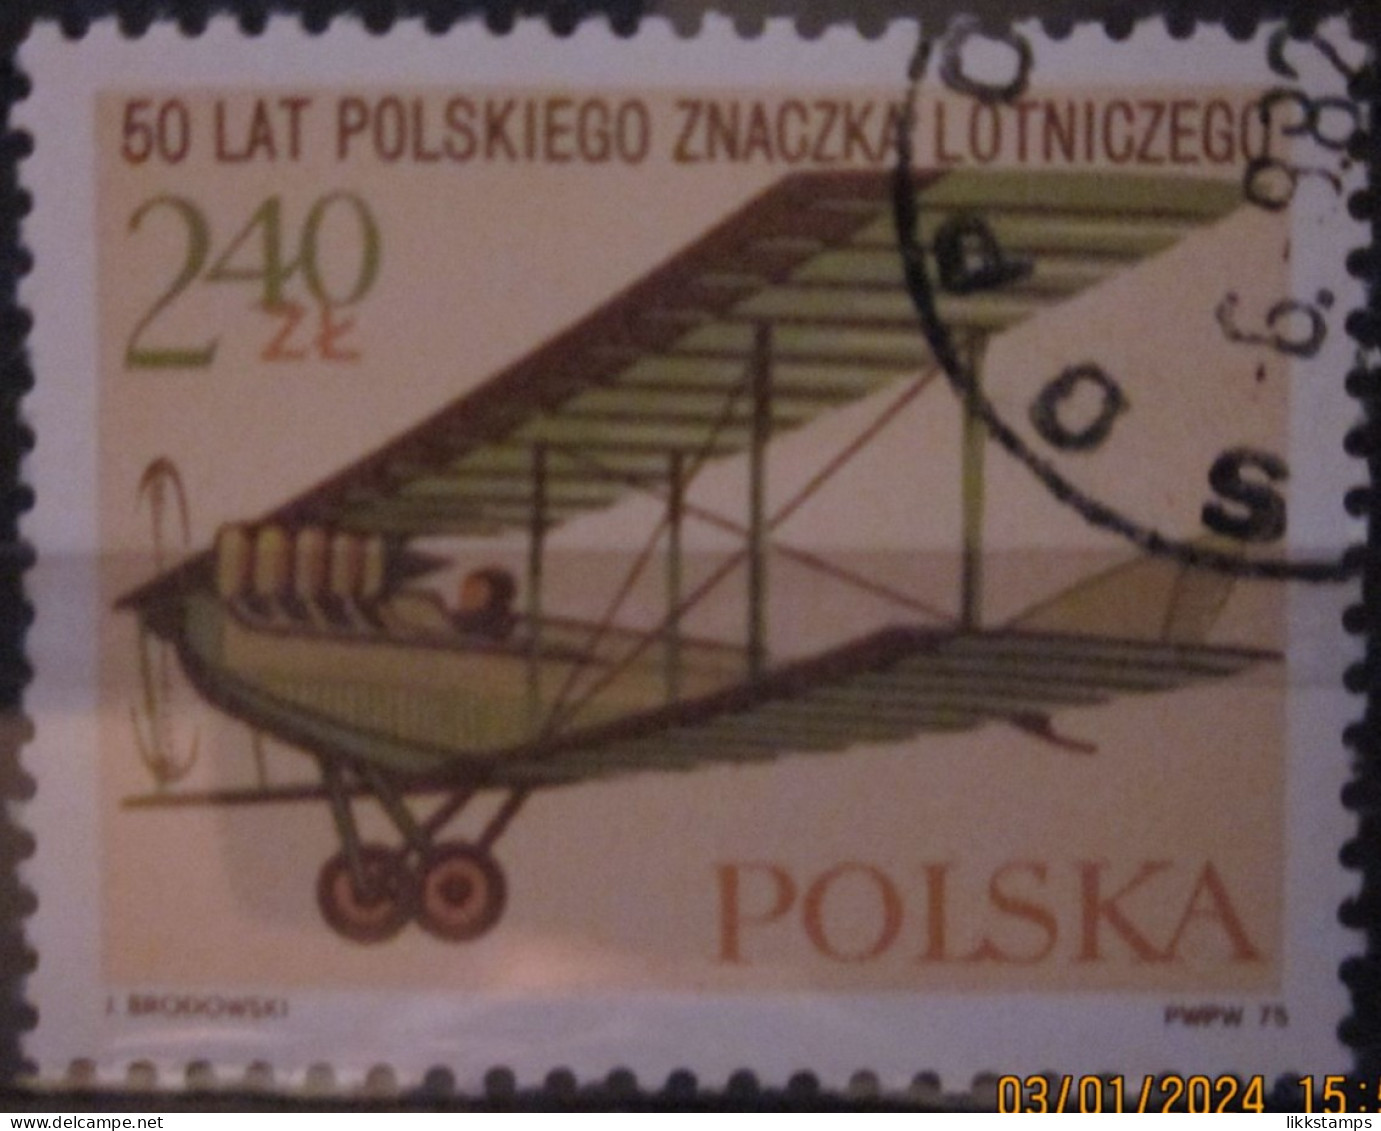 POLAND ~ 1975 ~ S.G. NUMBERS S.G. 2386. ~ AIRCRAFT ~ VFU #03518 - Used Stamps